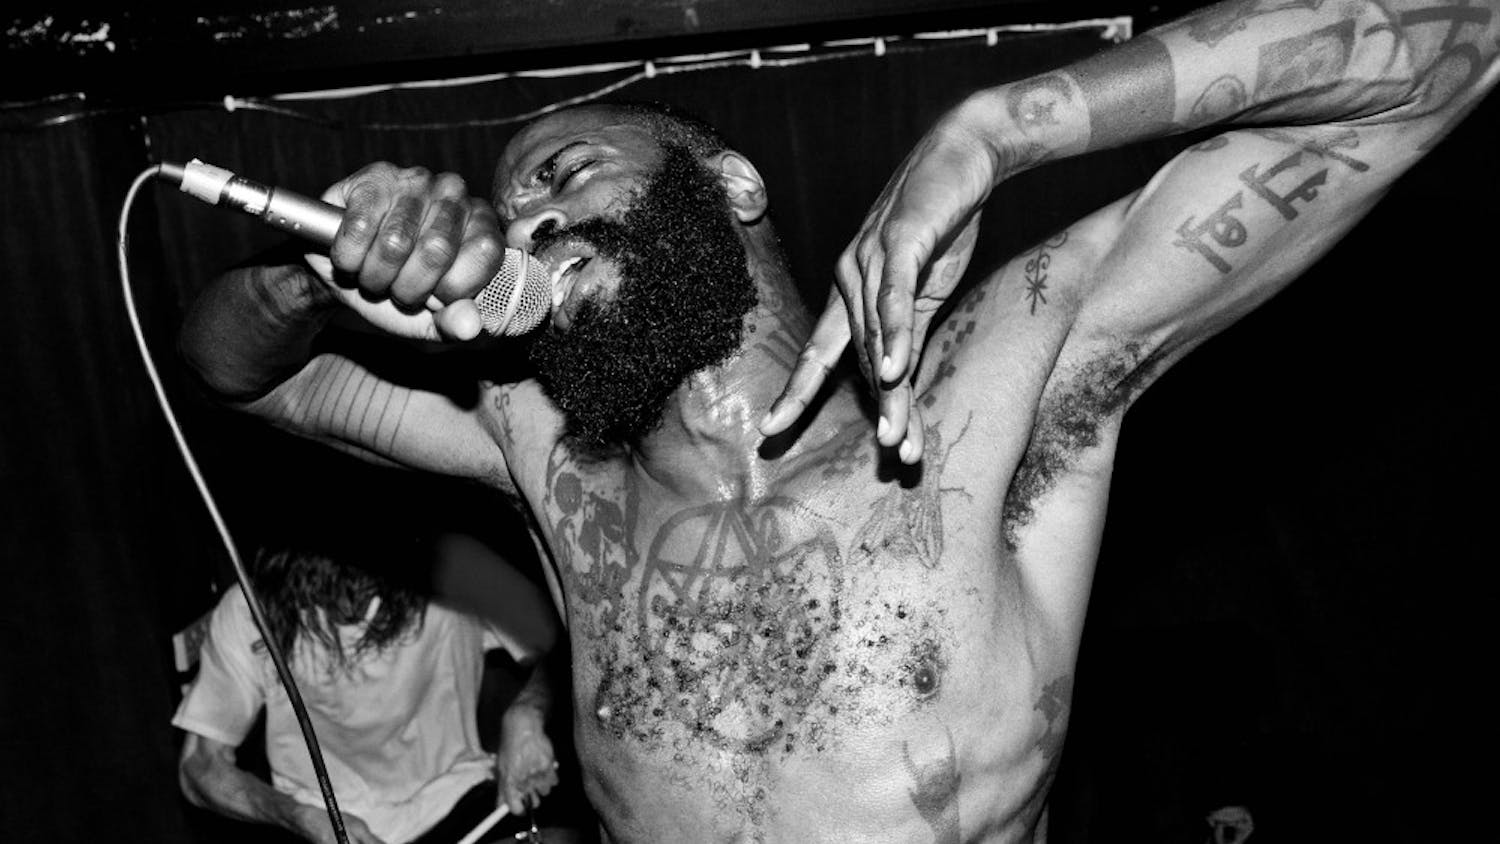 Death Grips play the Captain's Rest